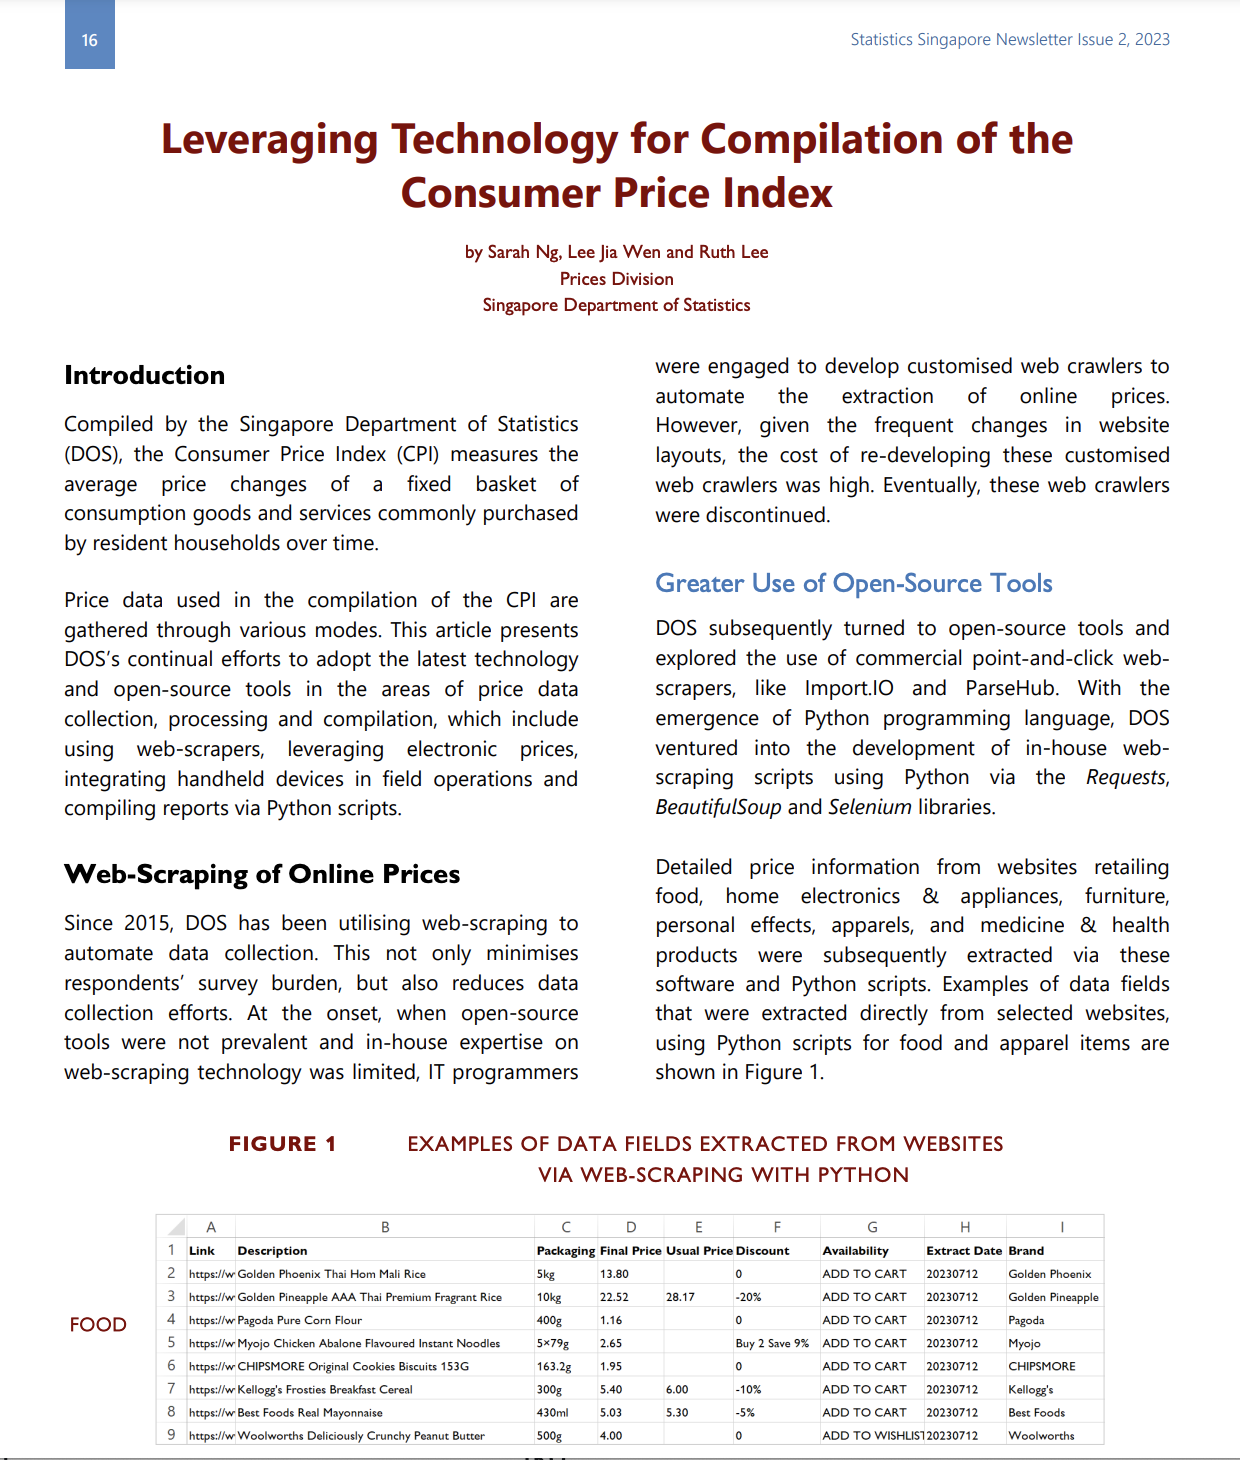 everaging Technology for Compilation of the Consumer Price Index